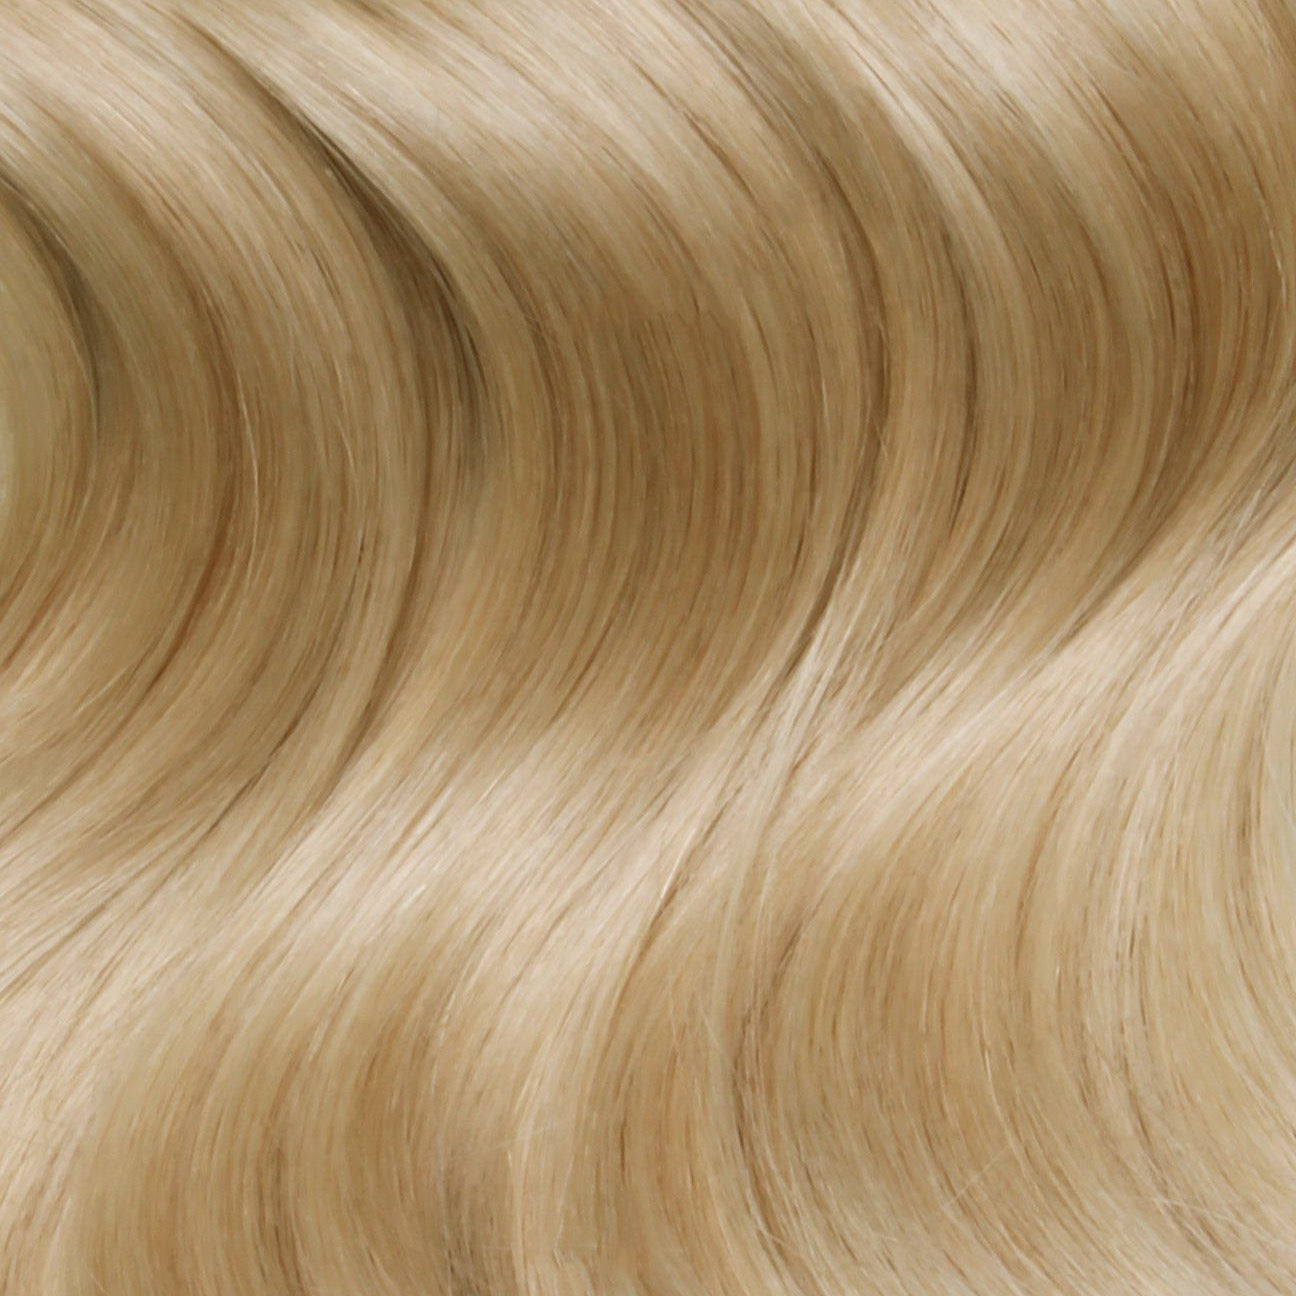 Nano Bonds 20 Inches - SWAY Hair Extensions Natural-Ash-Blonde-20 Ultra-fine, invisible bonds for a flawless, natural look. 100% Remy Human hair, lightweight and versatile. Reusable and perfect for individual or salon use.